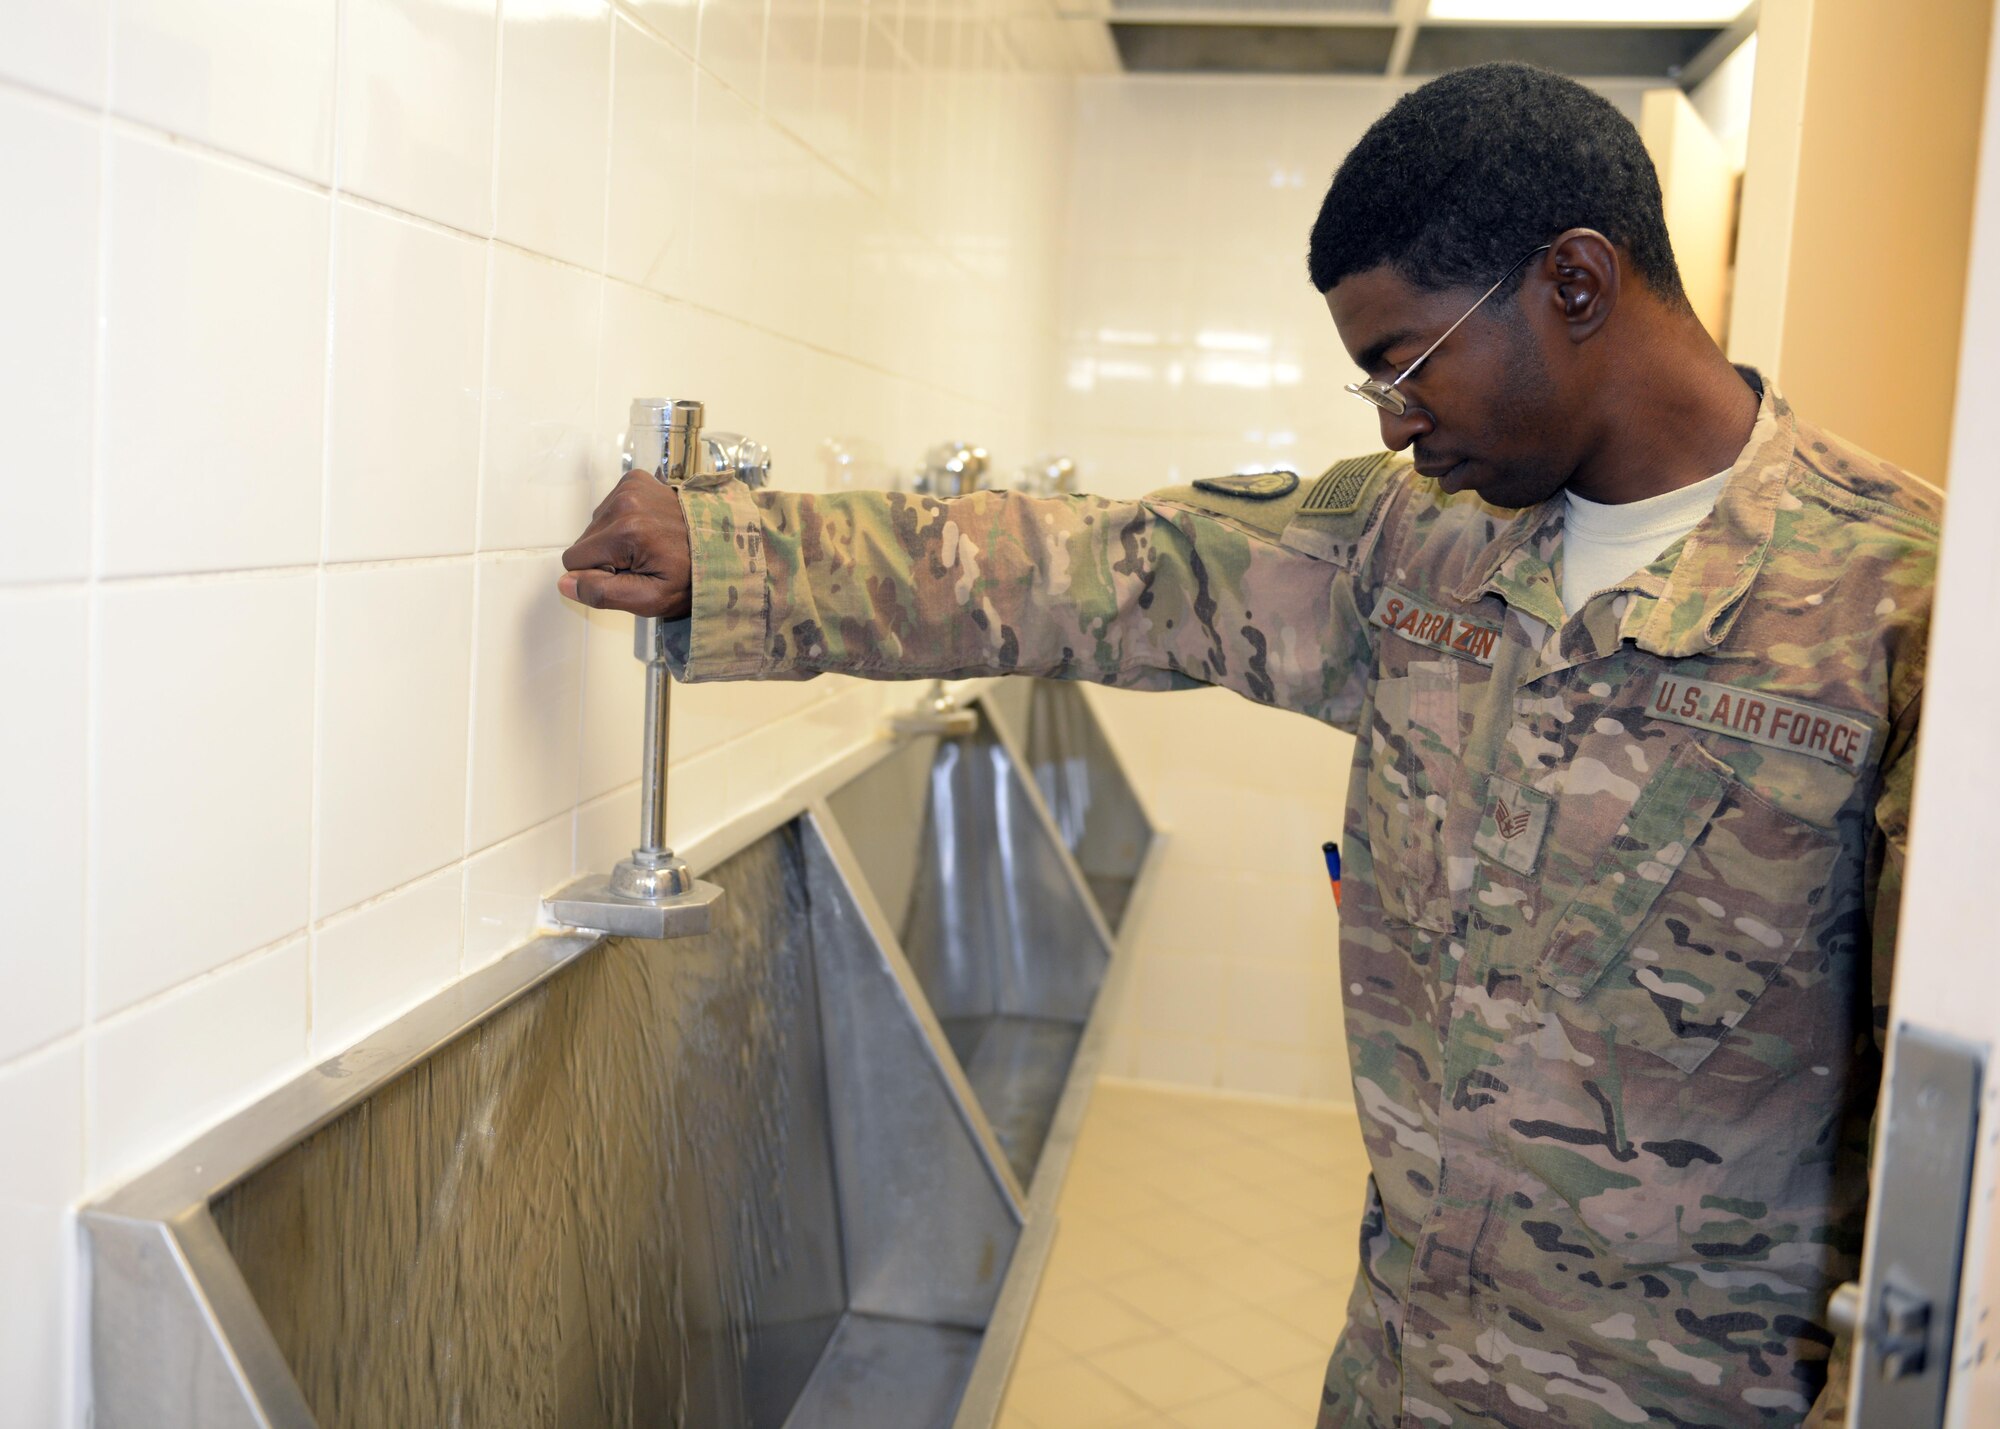 U.S. Air Force Staff Sgt. Stark Sarrazin, 455th Expeditionary Civil Engineer Squadron non-commissioned officer in charge of water and fuels systems maintenance, flushes a water system in a dormitory Aug. 27, 2015, at Bagram Airfield, Afghanistan. Sarrazin is one of three Airmen responsible for maintaining the fuel line on the airfield as well as quality of life of some living quarters on base and a few facilities that are not yet contracted. (U.S. Air Force photo by Senior Airman Cierra Presentado/Released)